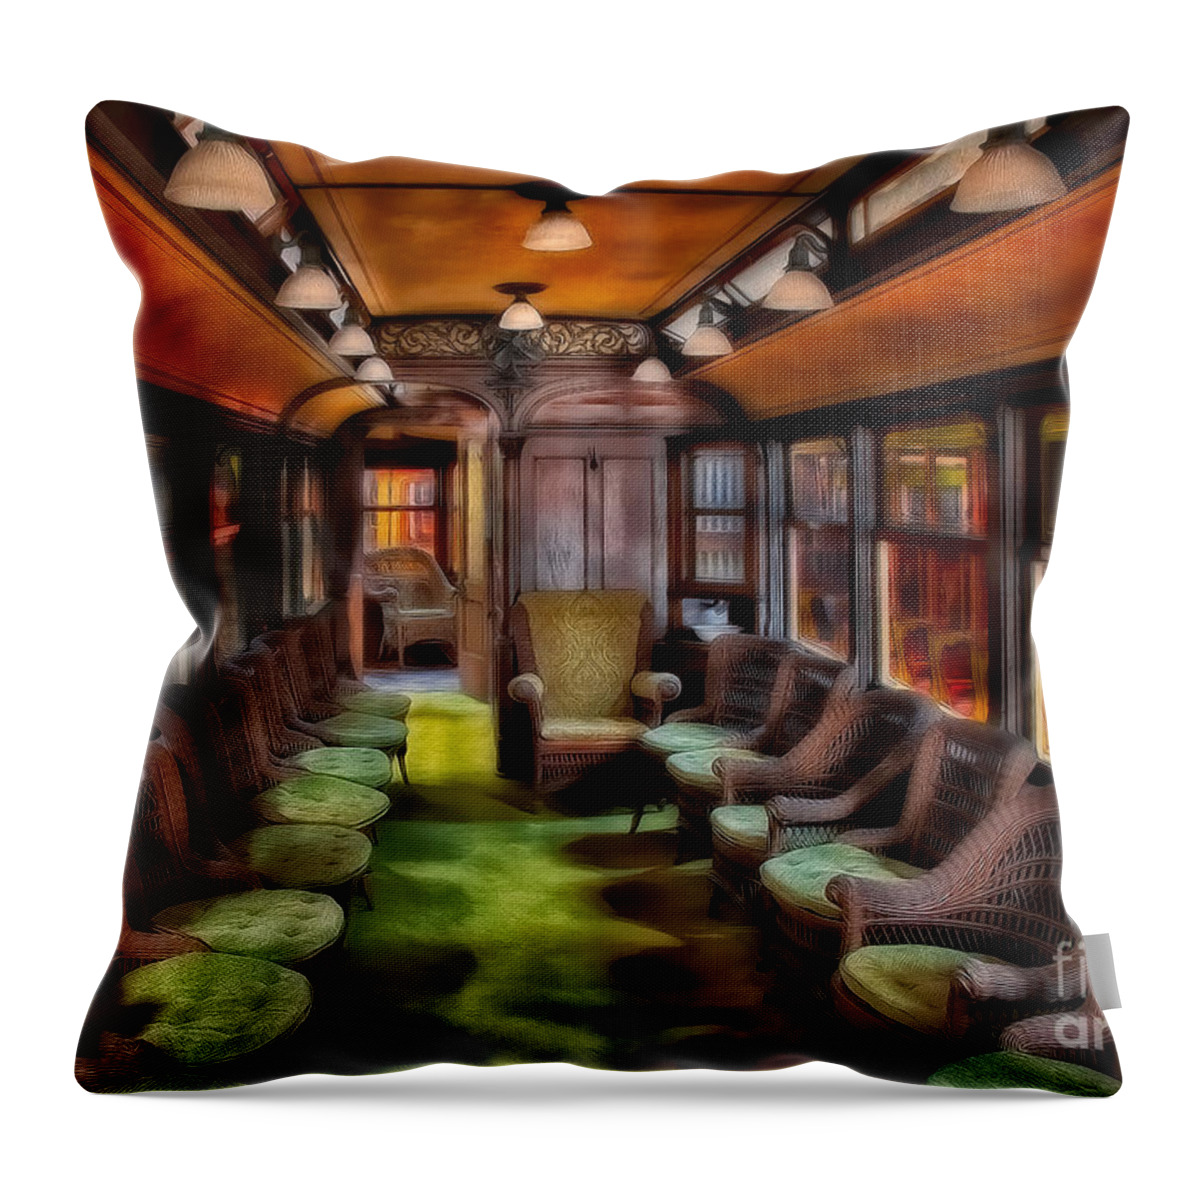 Trolley Throw Pillow featuring the digital art Luxury Vintage Trolley by Susan Candelario